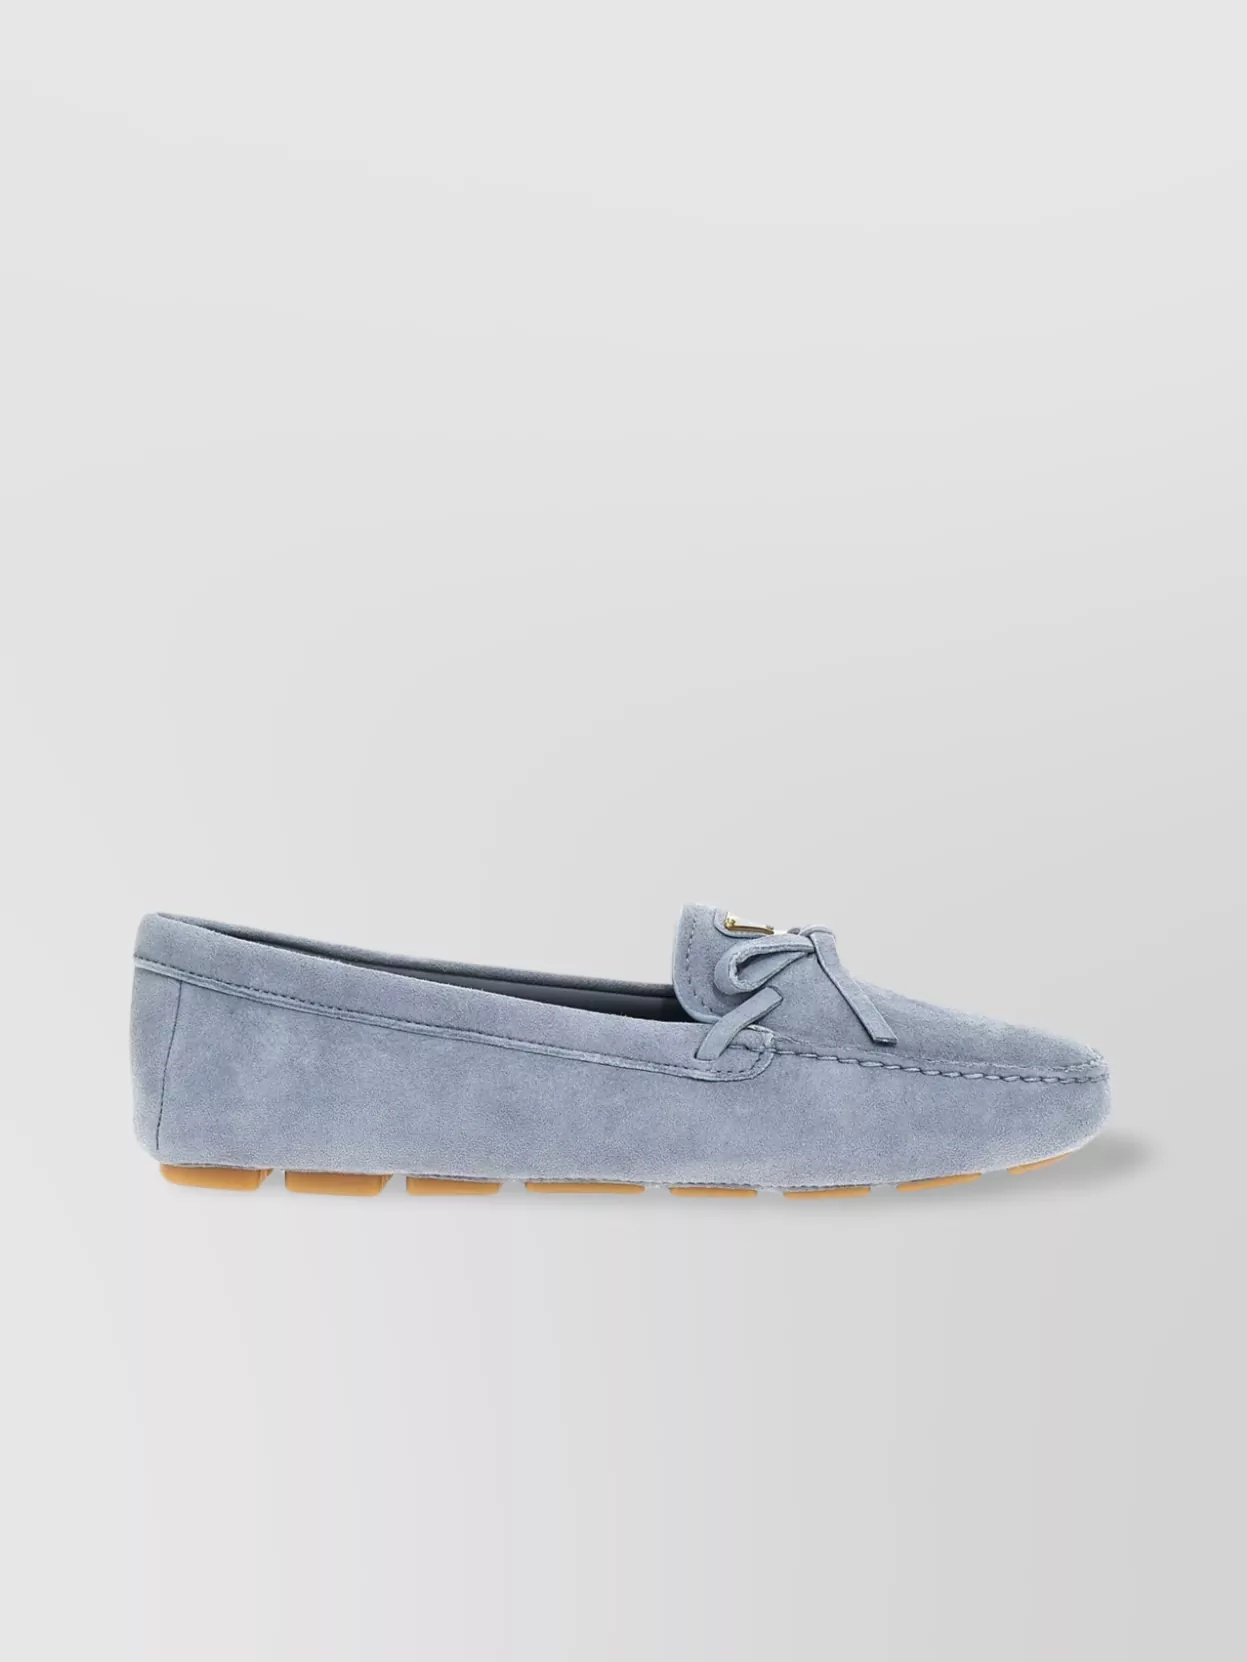 Prada Suede Finish Moc Toe Loafers With Bow